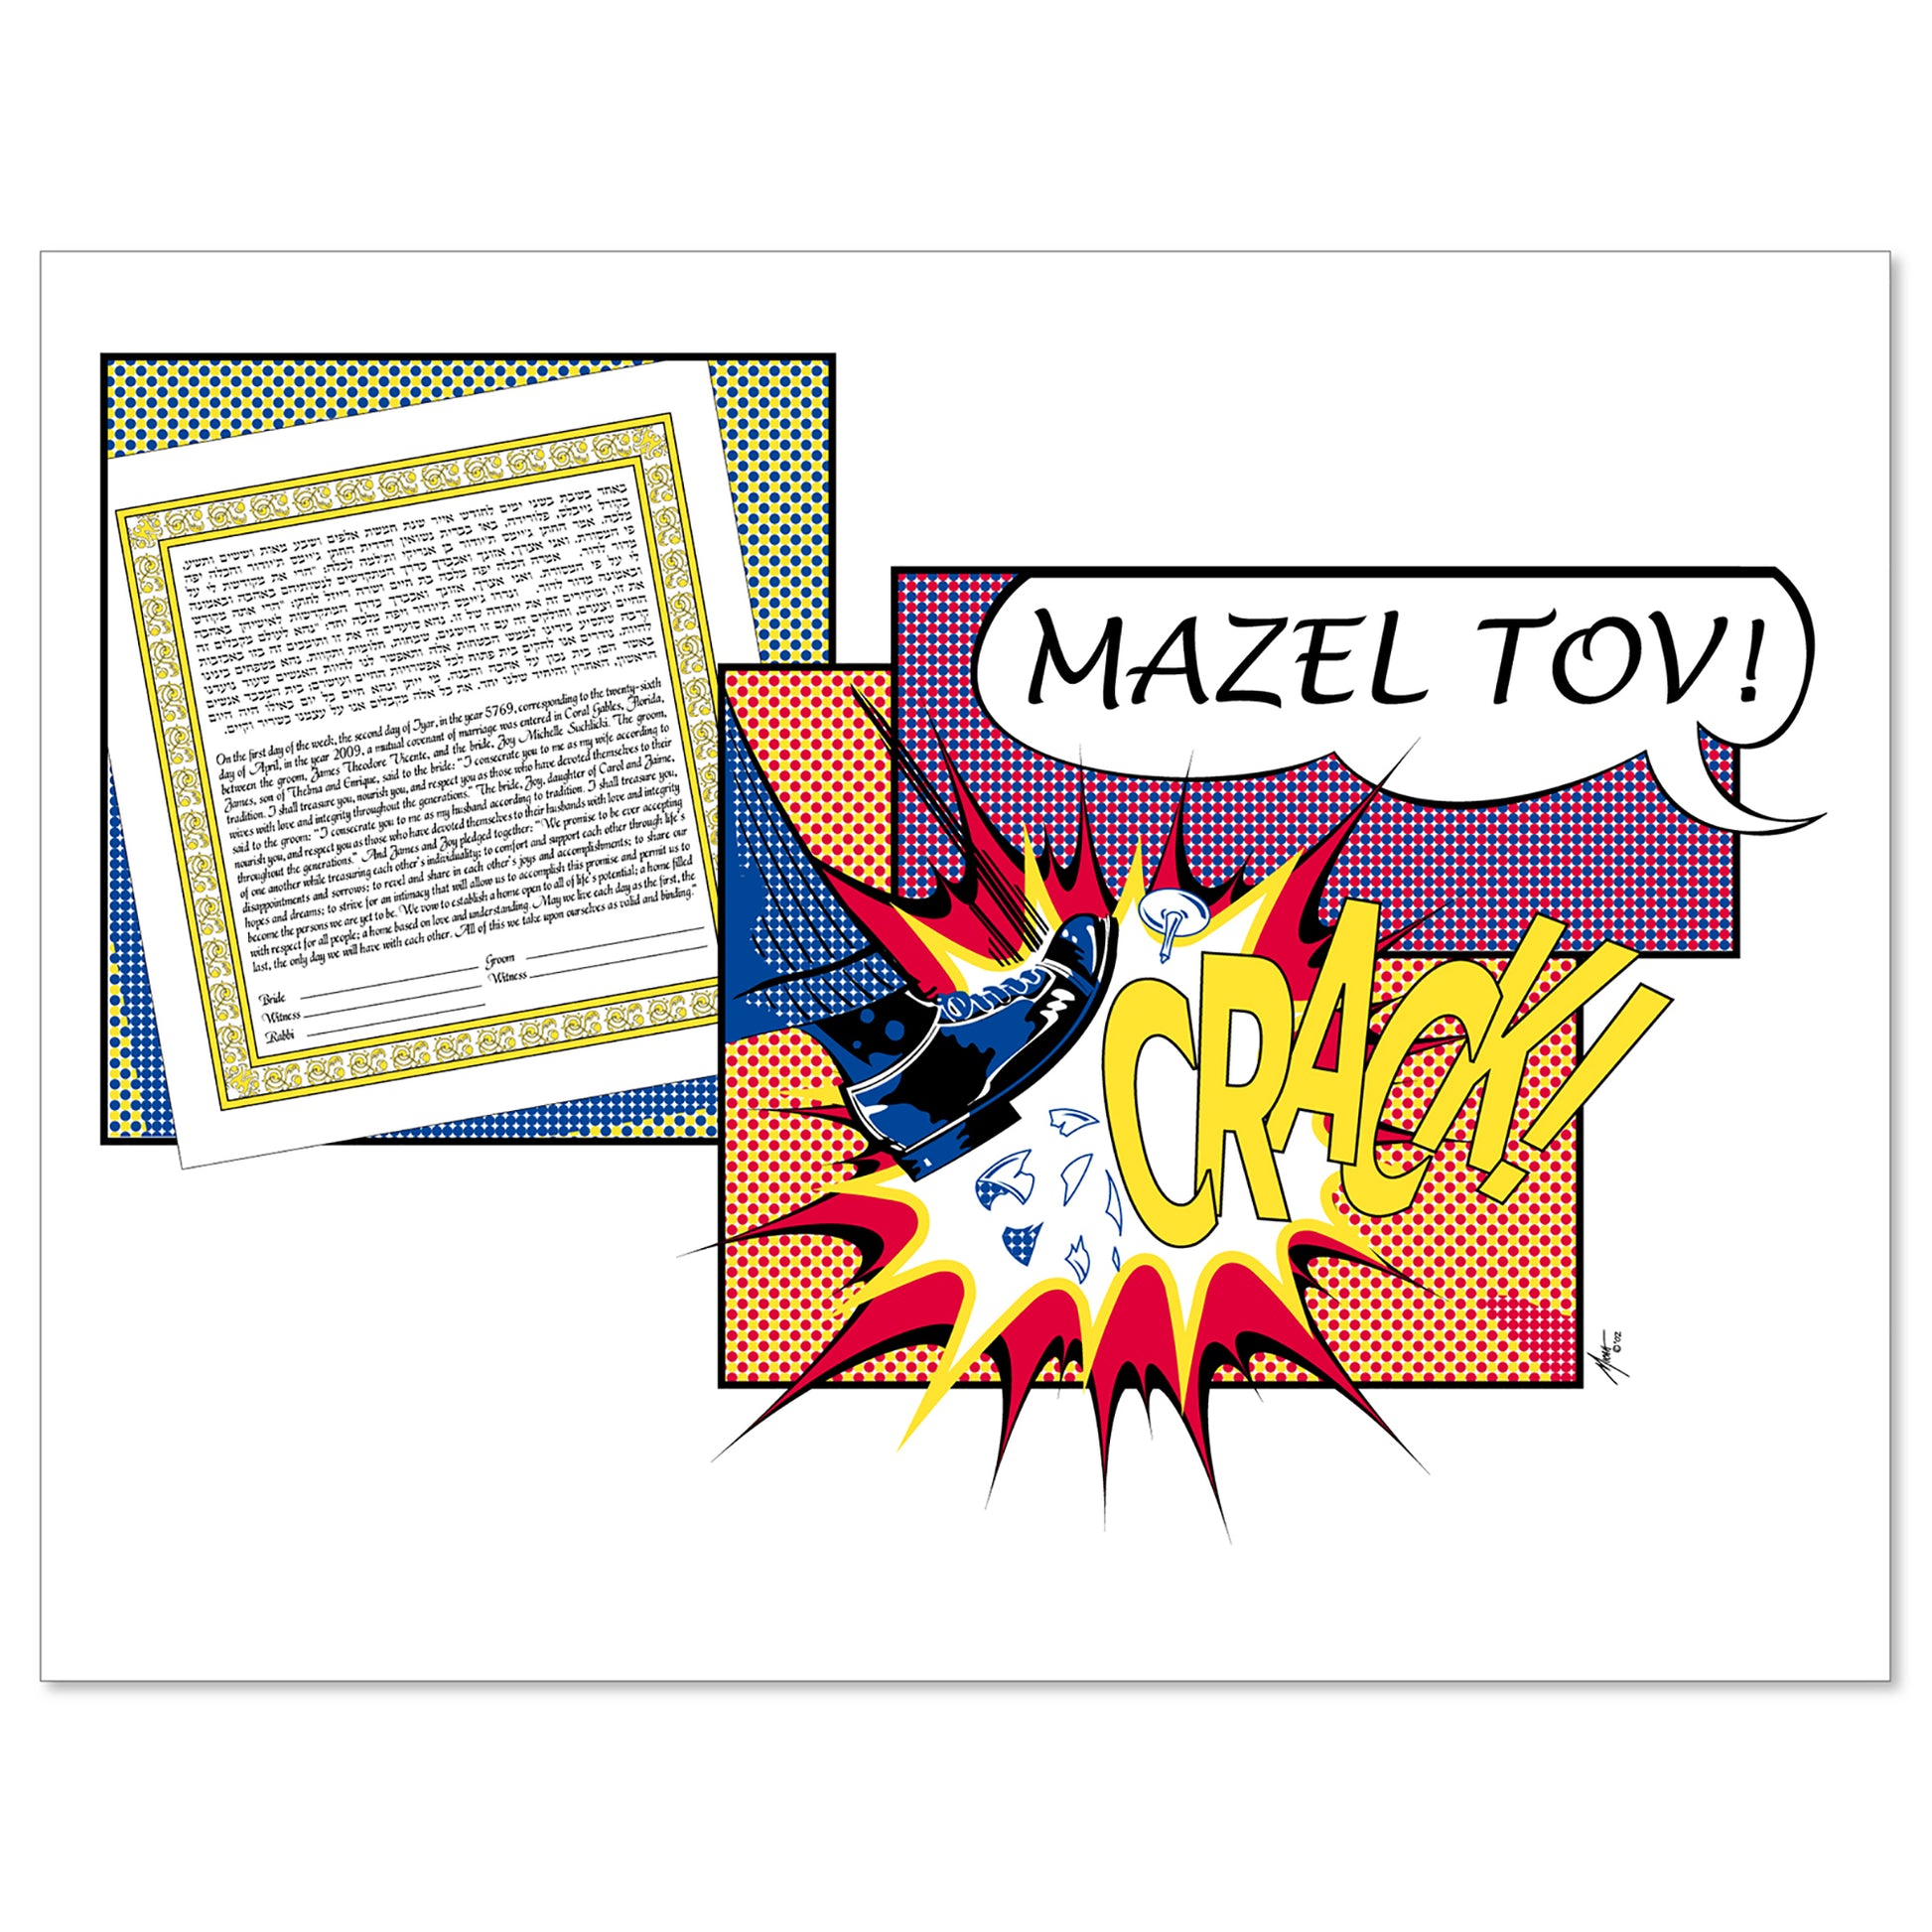 Mazel Tov ketubah by Micah Parker in pop art style with bold colors of red, blue, and yellow.